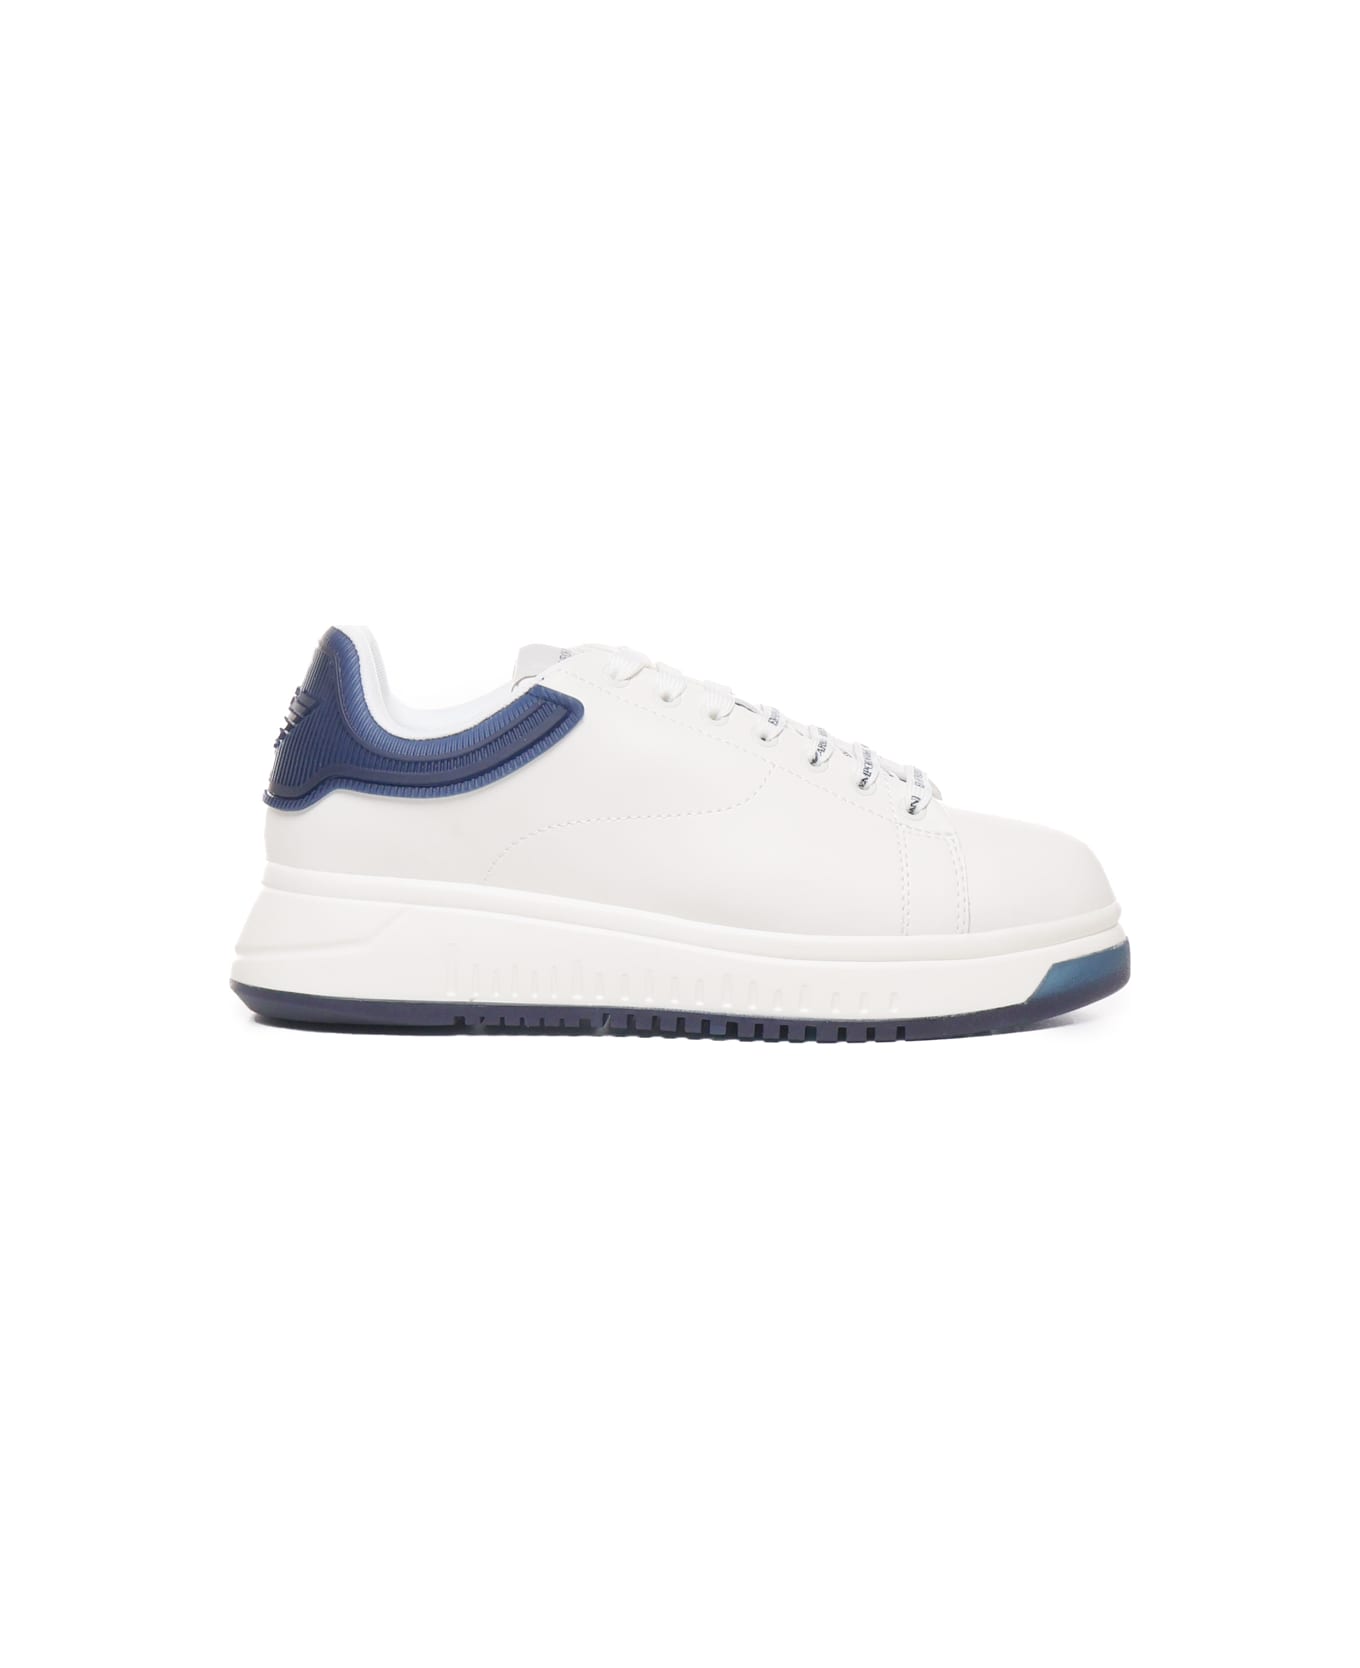 Emporio Armani Sneakers With Contrasting Rivet - White, blue